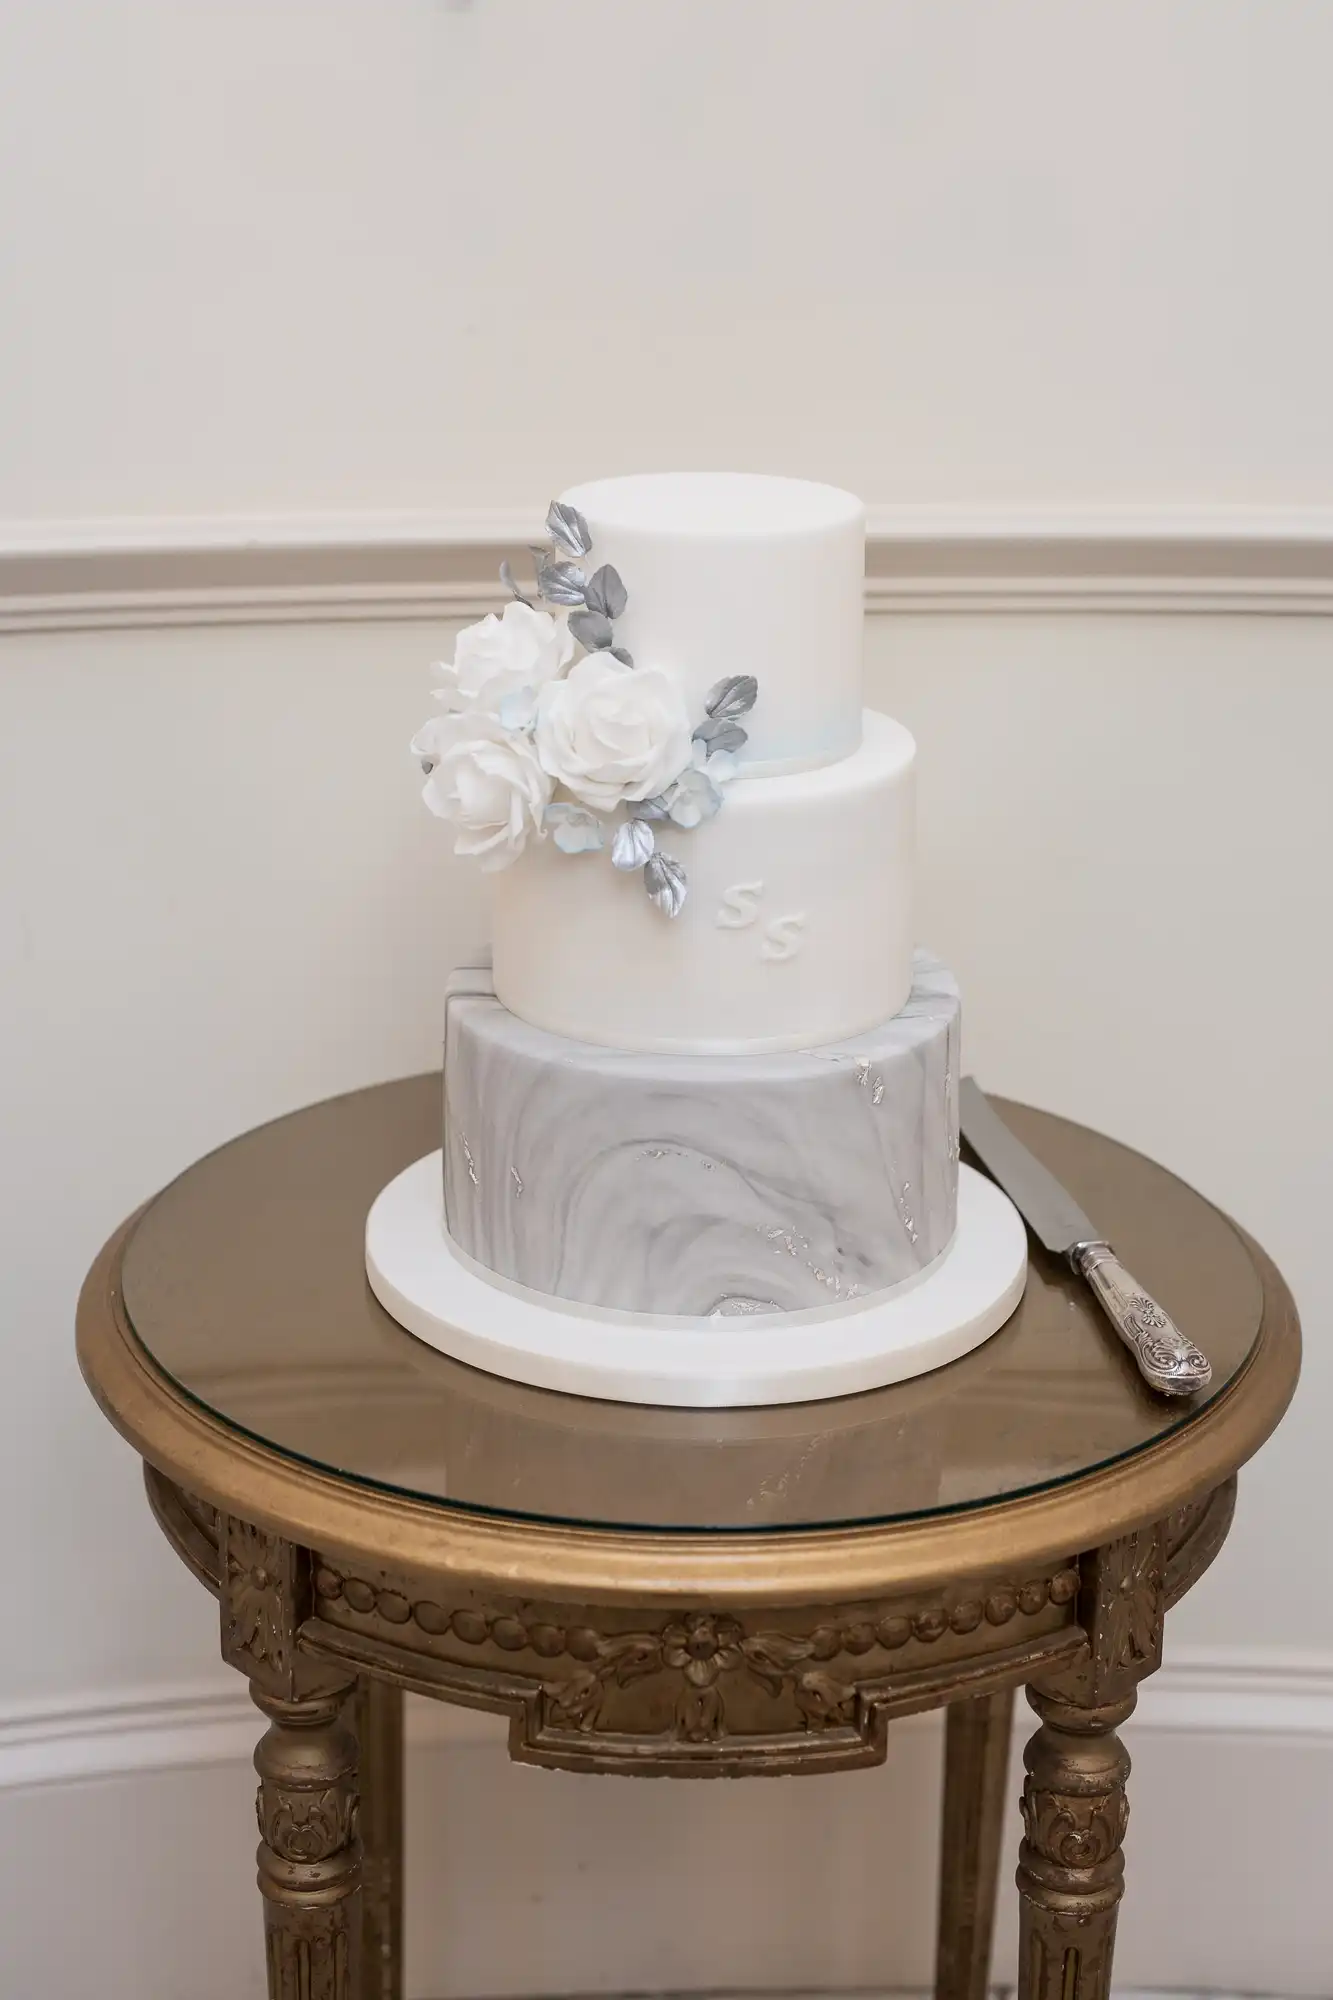 A three-tiered wedding cake with white and gray marbled design, decorated with white and silver flowers, displayed on a gold mirrored table with a cake knife.